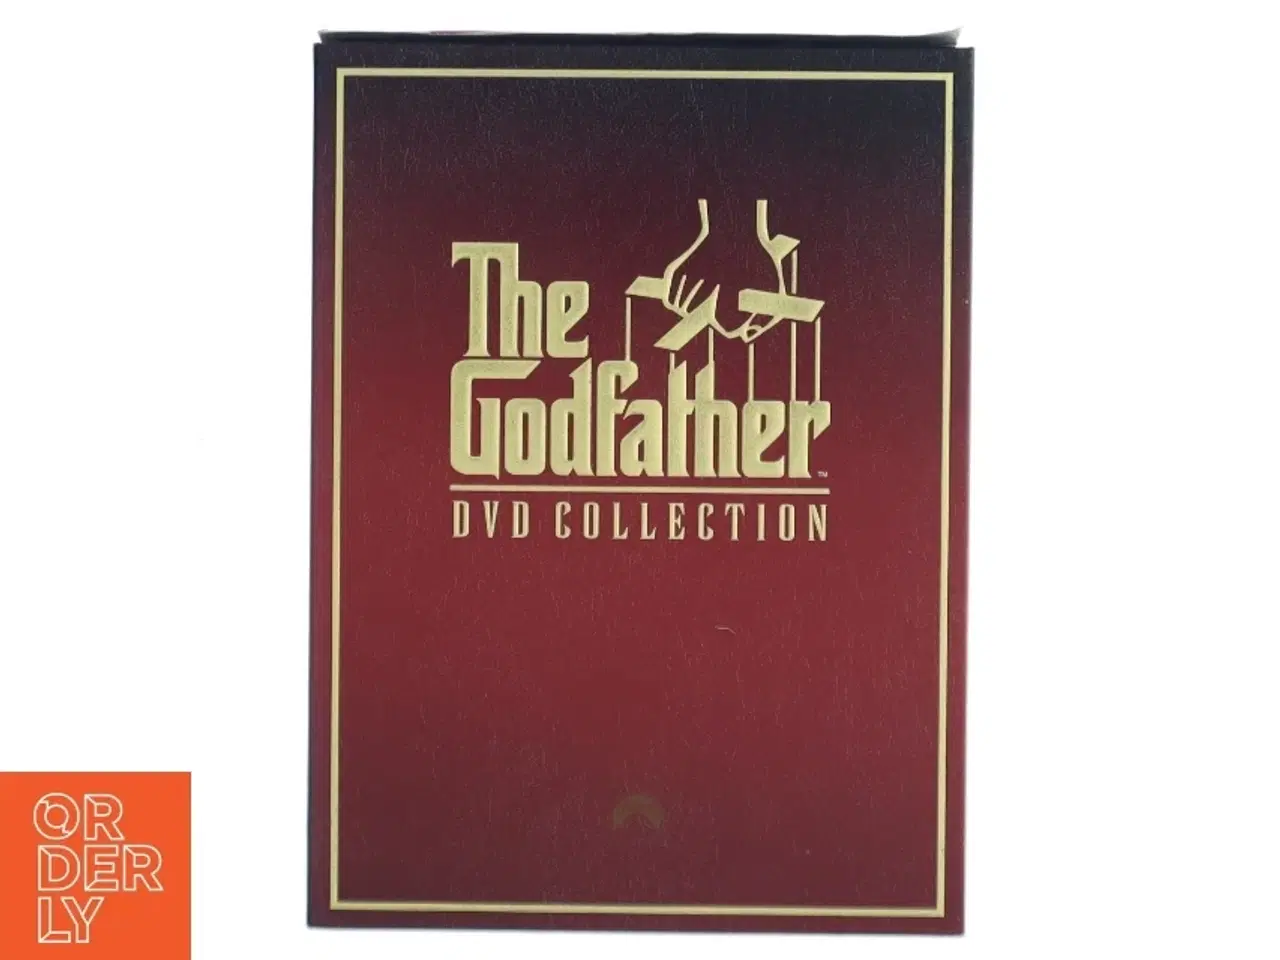 Billede 1 - The Godfather DVD Collection (DVD)